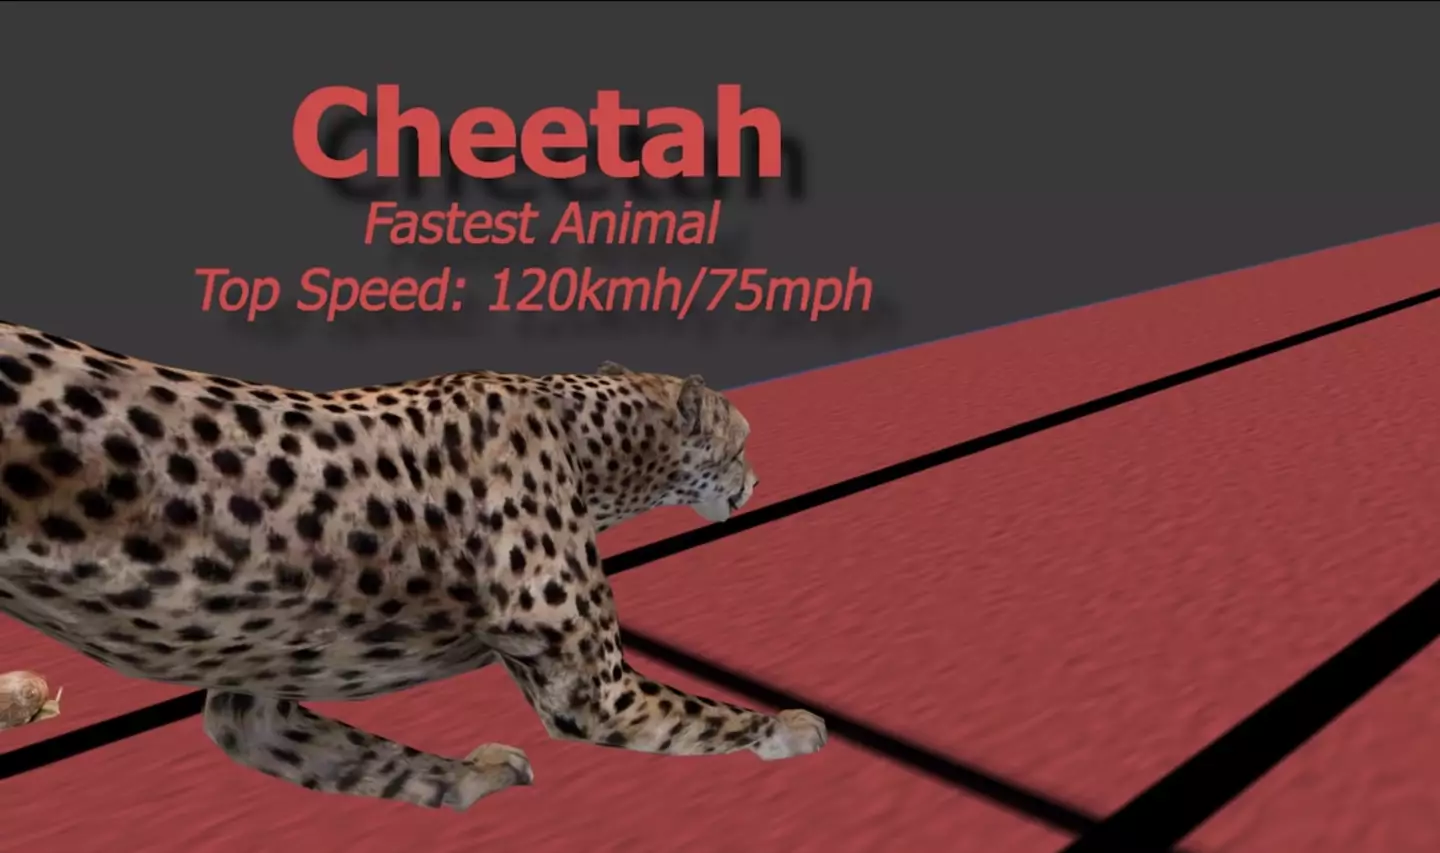 The cheetah wins hands - paws - down. (Reigarw Comparisons/YouTube)